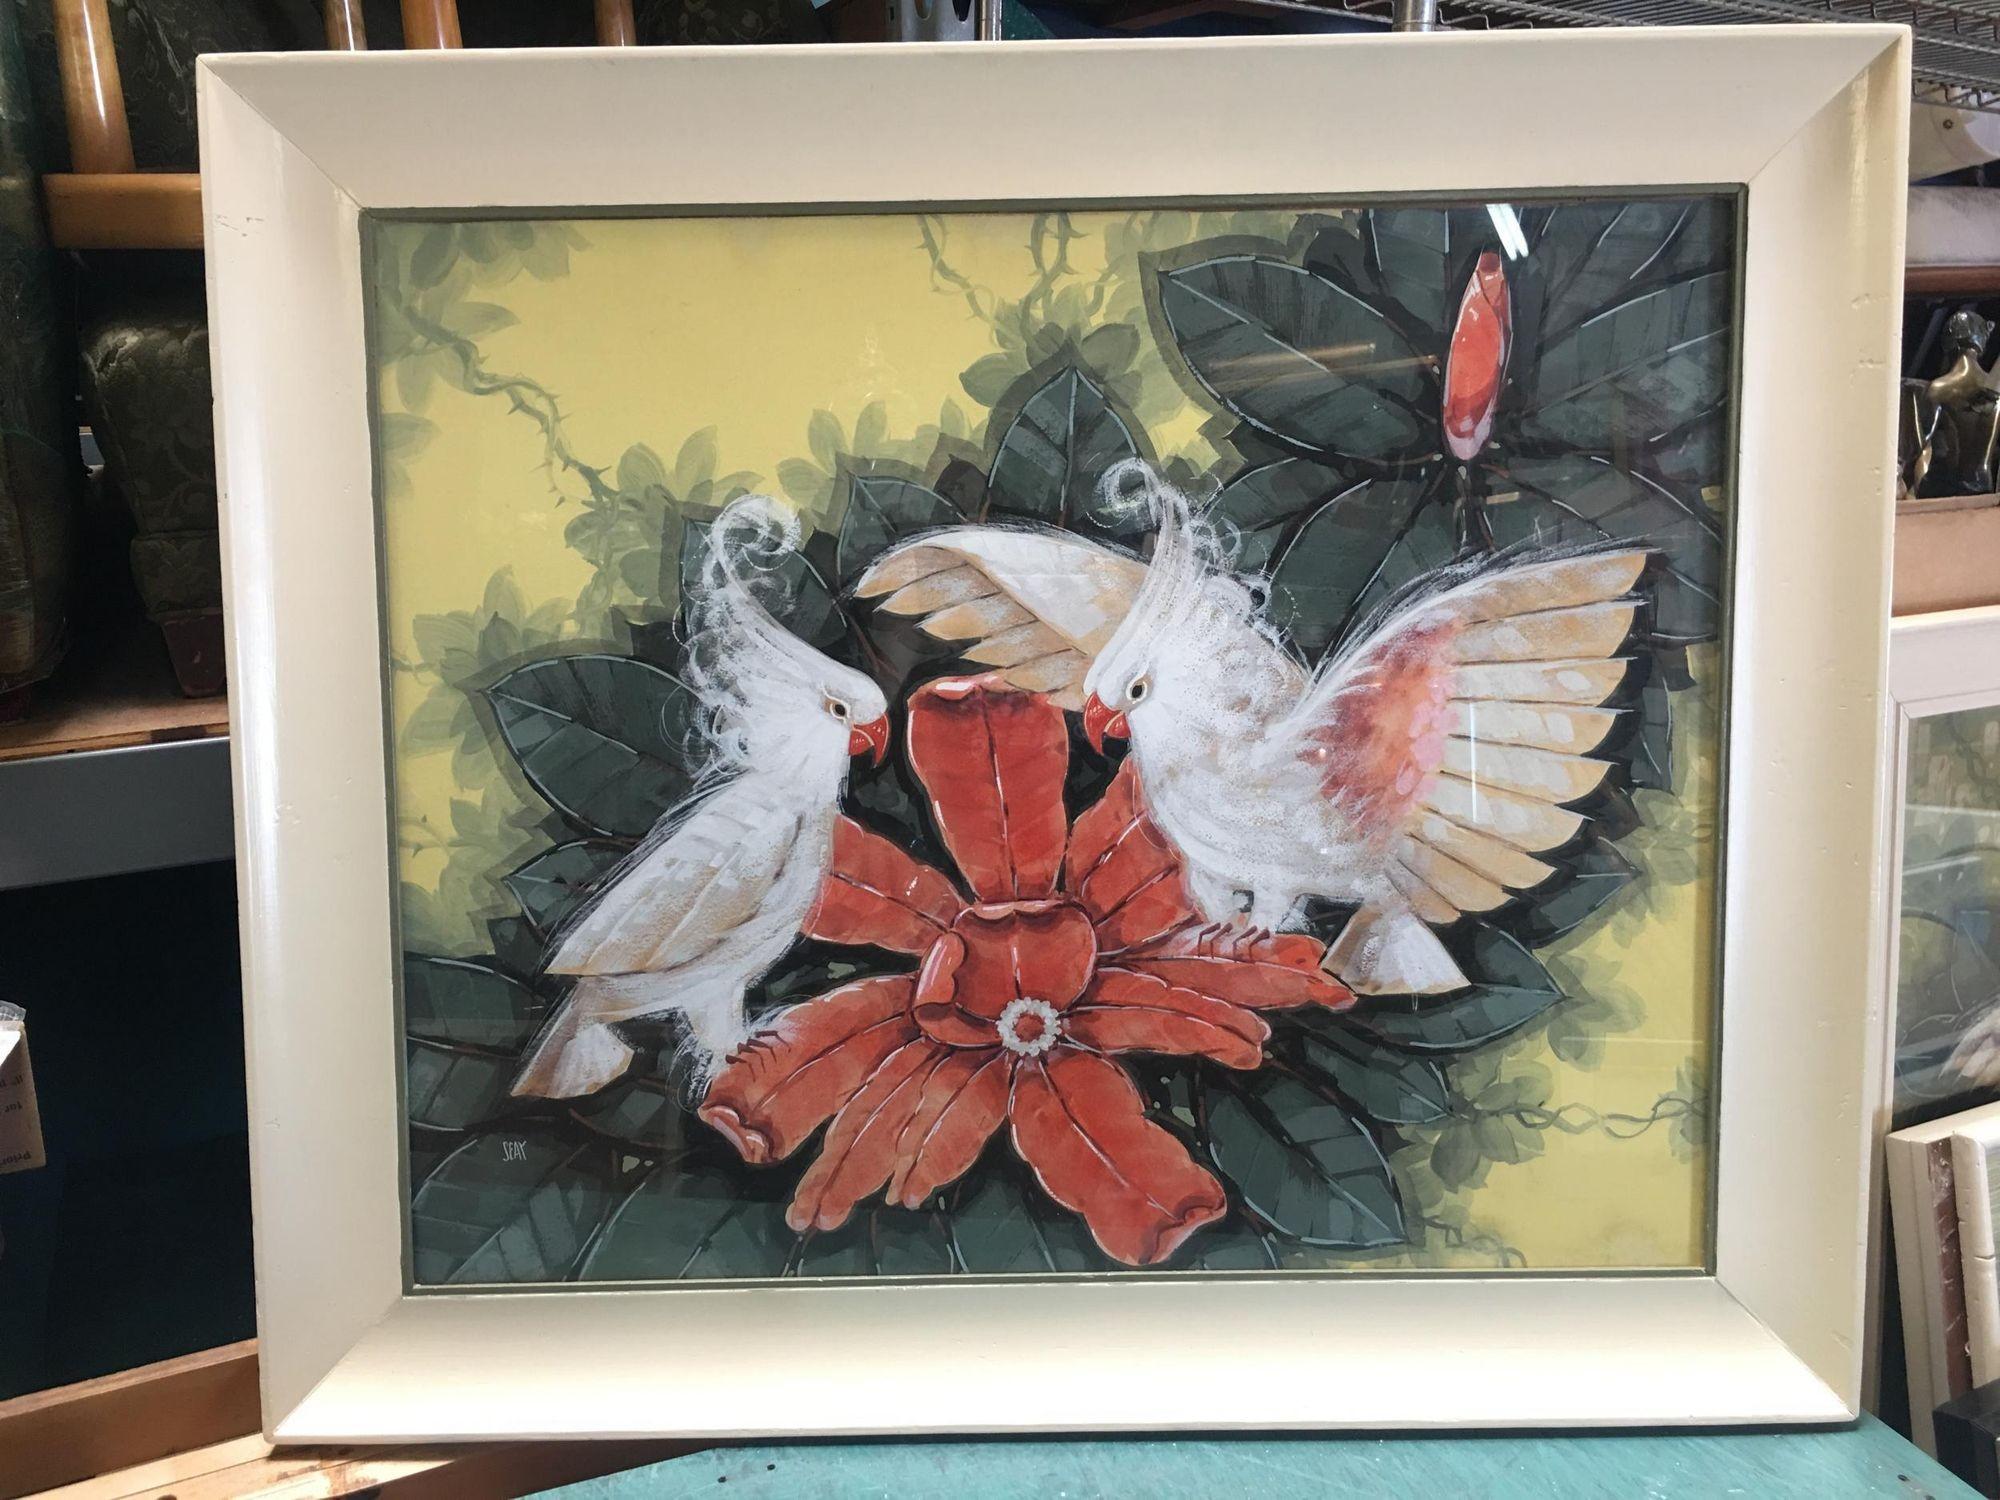 Billy Seay Airbrushed Parrot Lovers artwork (original airbrushed over a print) for the Turner Company, circa 1948, in the original white painted frame. This a great example of the post-WWII Hawaiian and tropical art/decorating boom. Great for